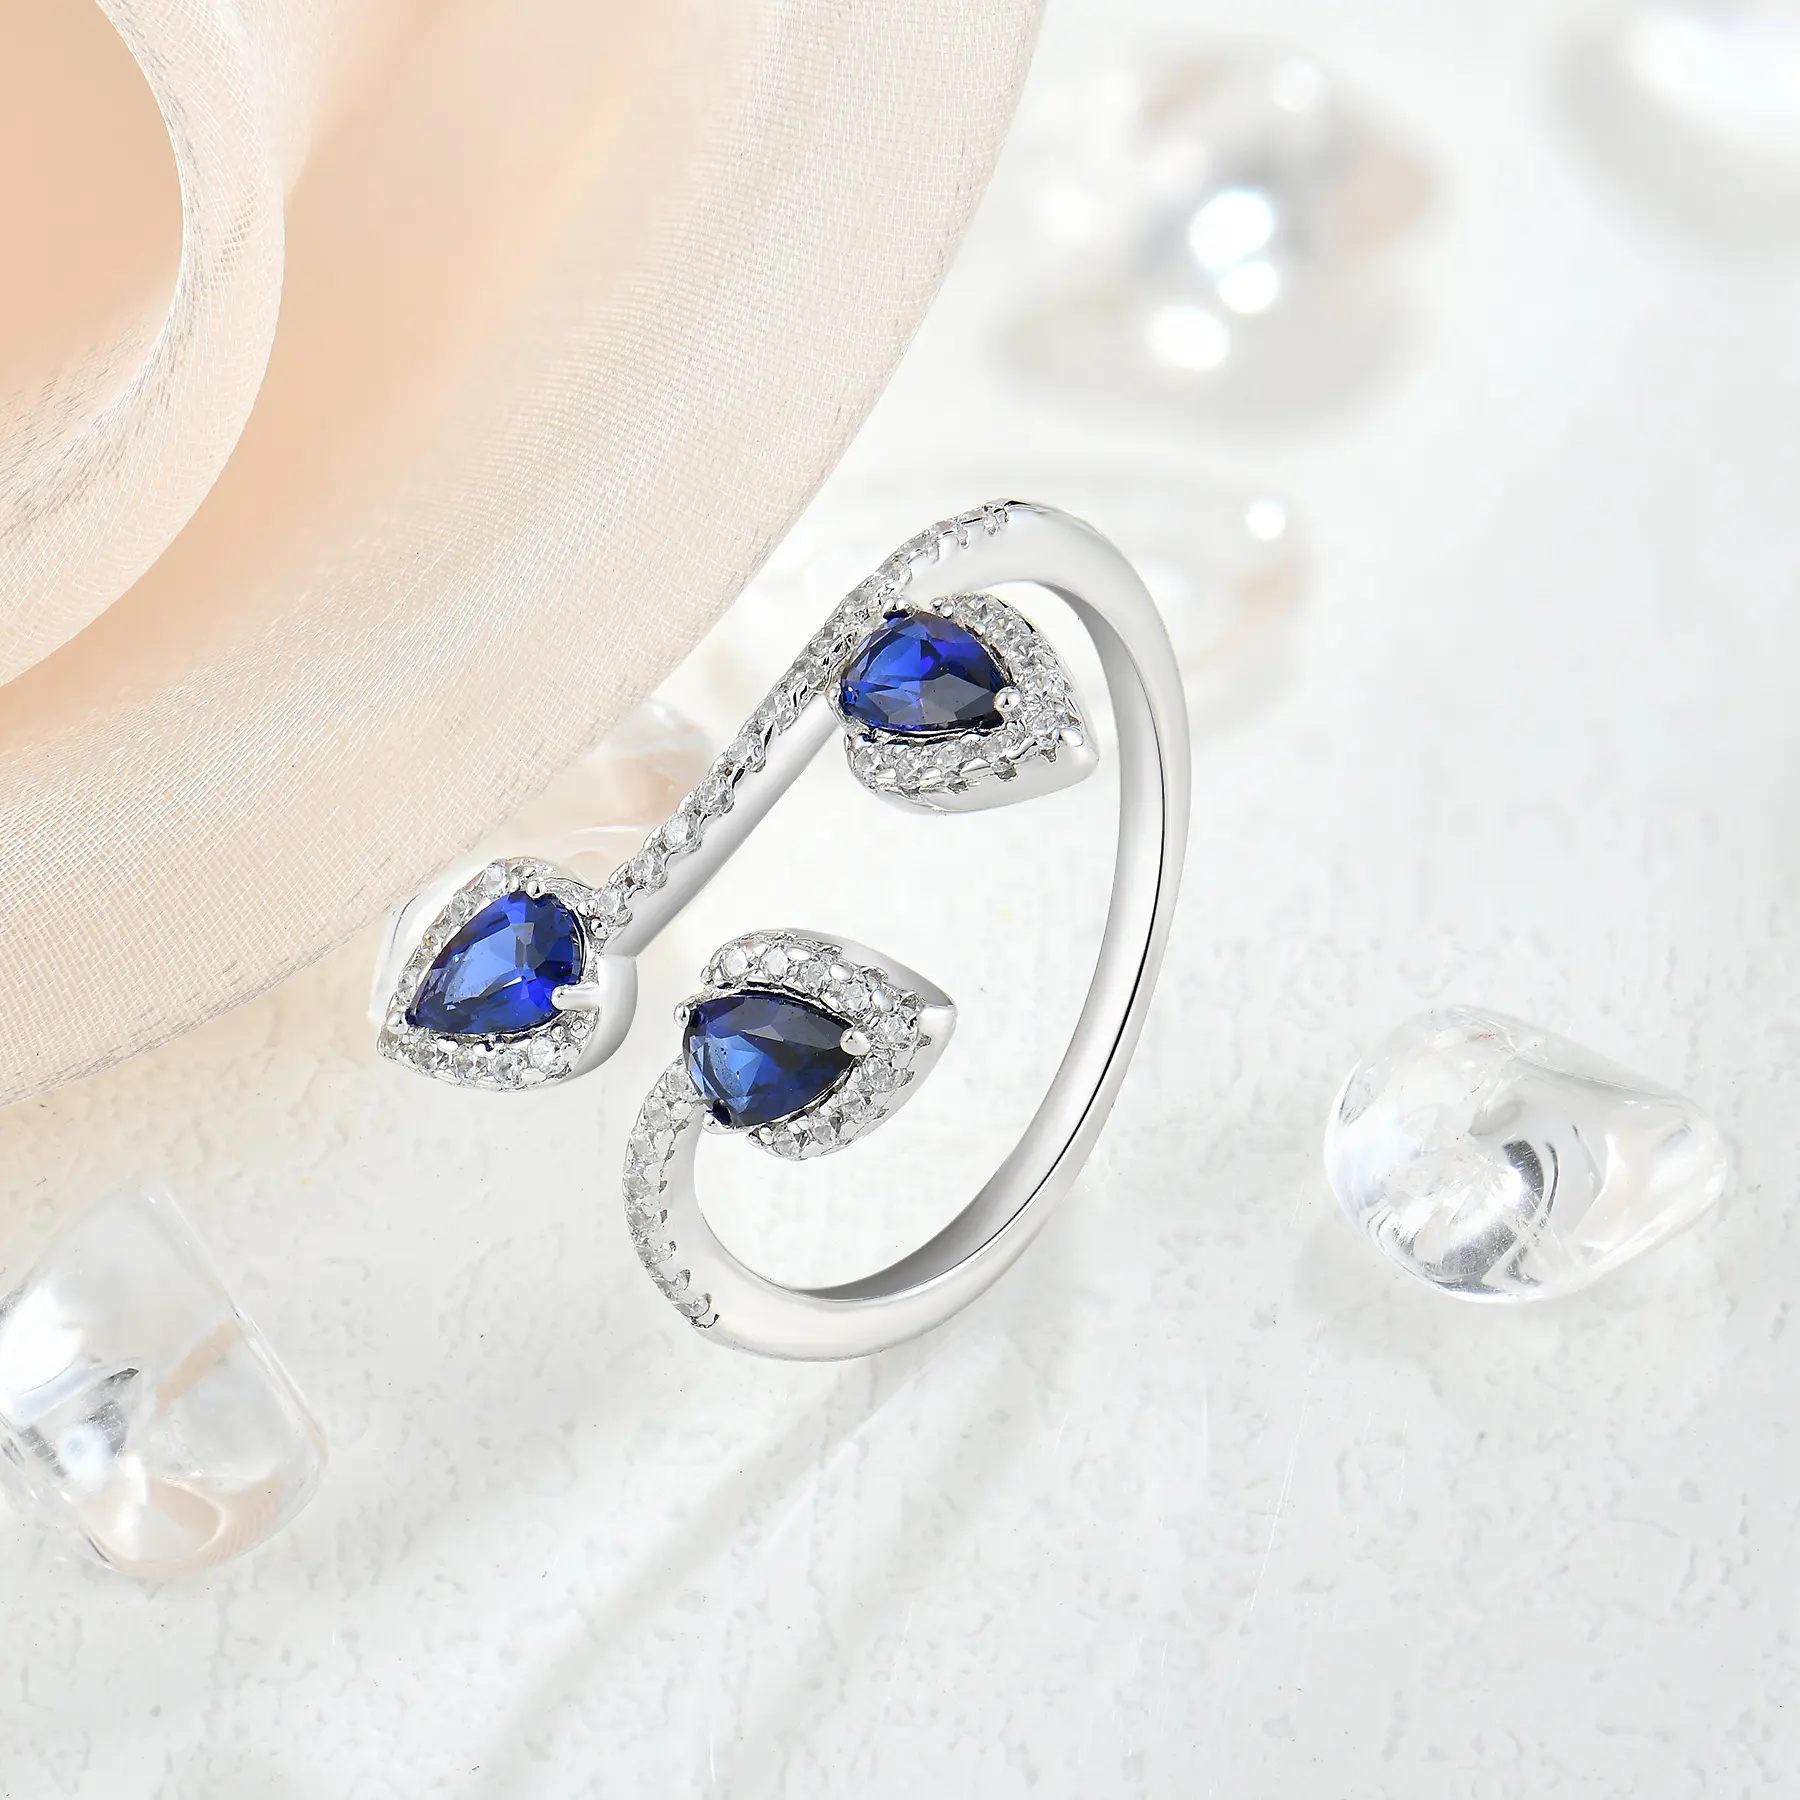 Simple 925 Sterling Silver Jewelry Droplet Sapphire Zirconia Adjustable Open Ring Suitable for Women